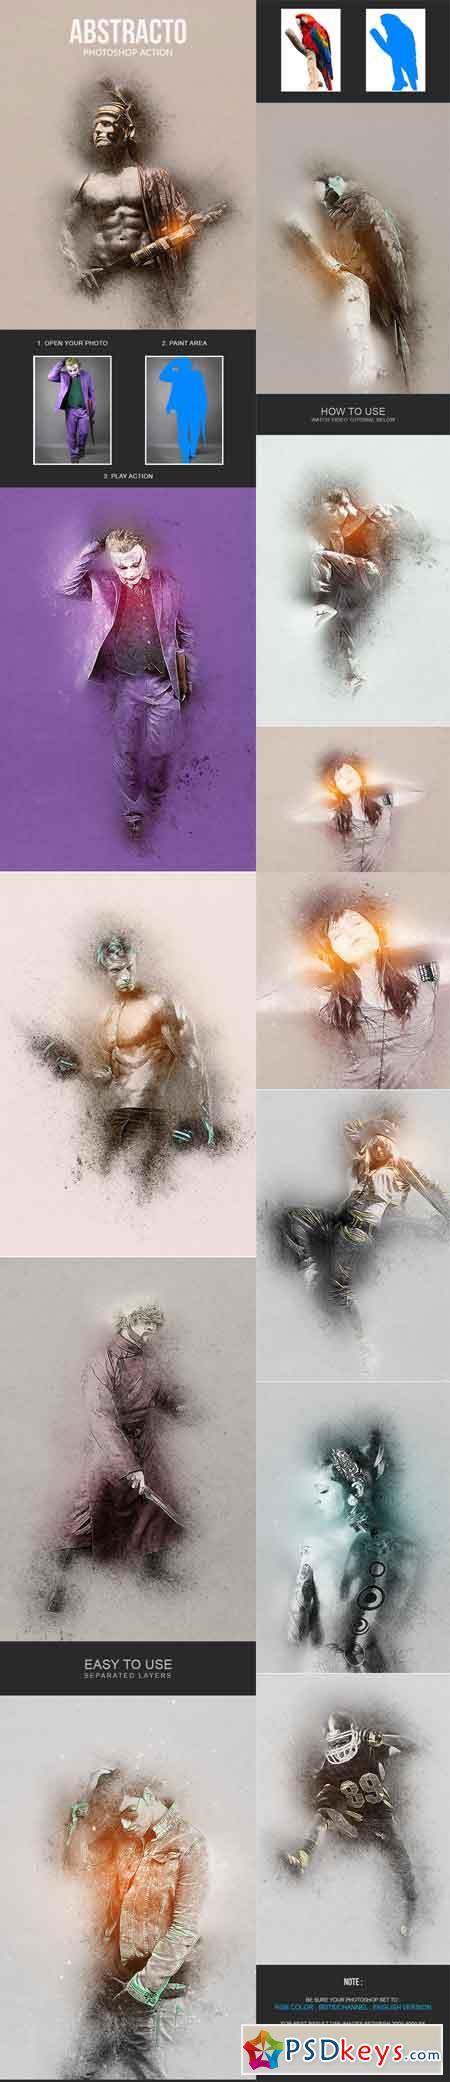 Abstracto - Photoshop Action 19623275